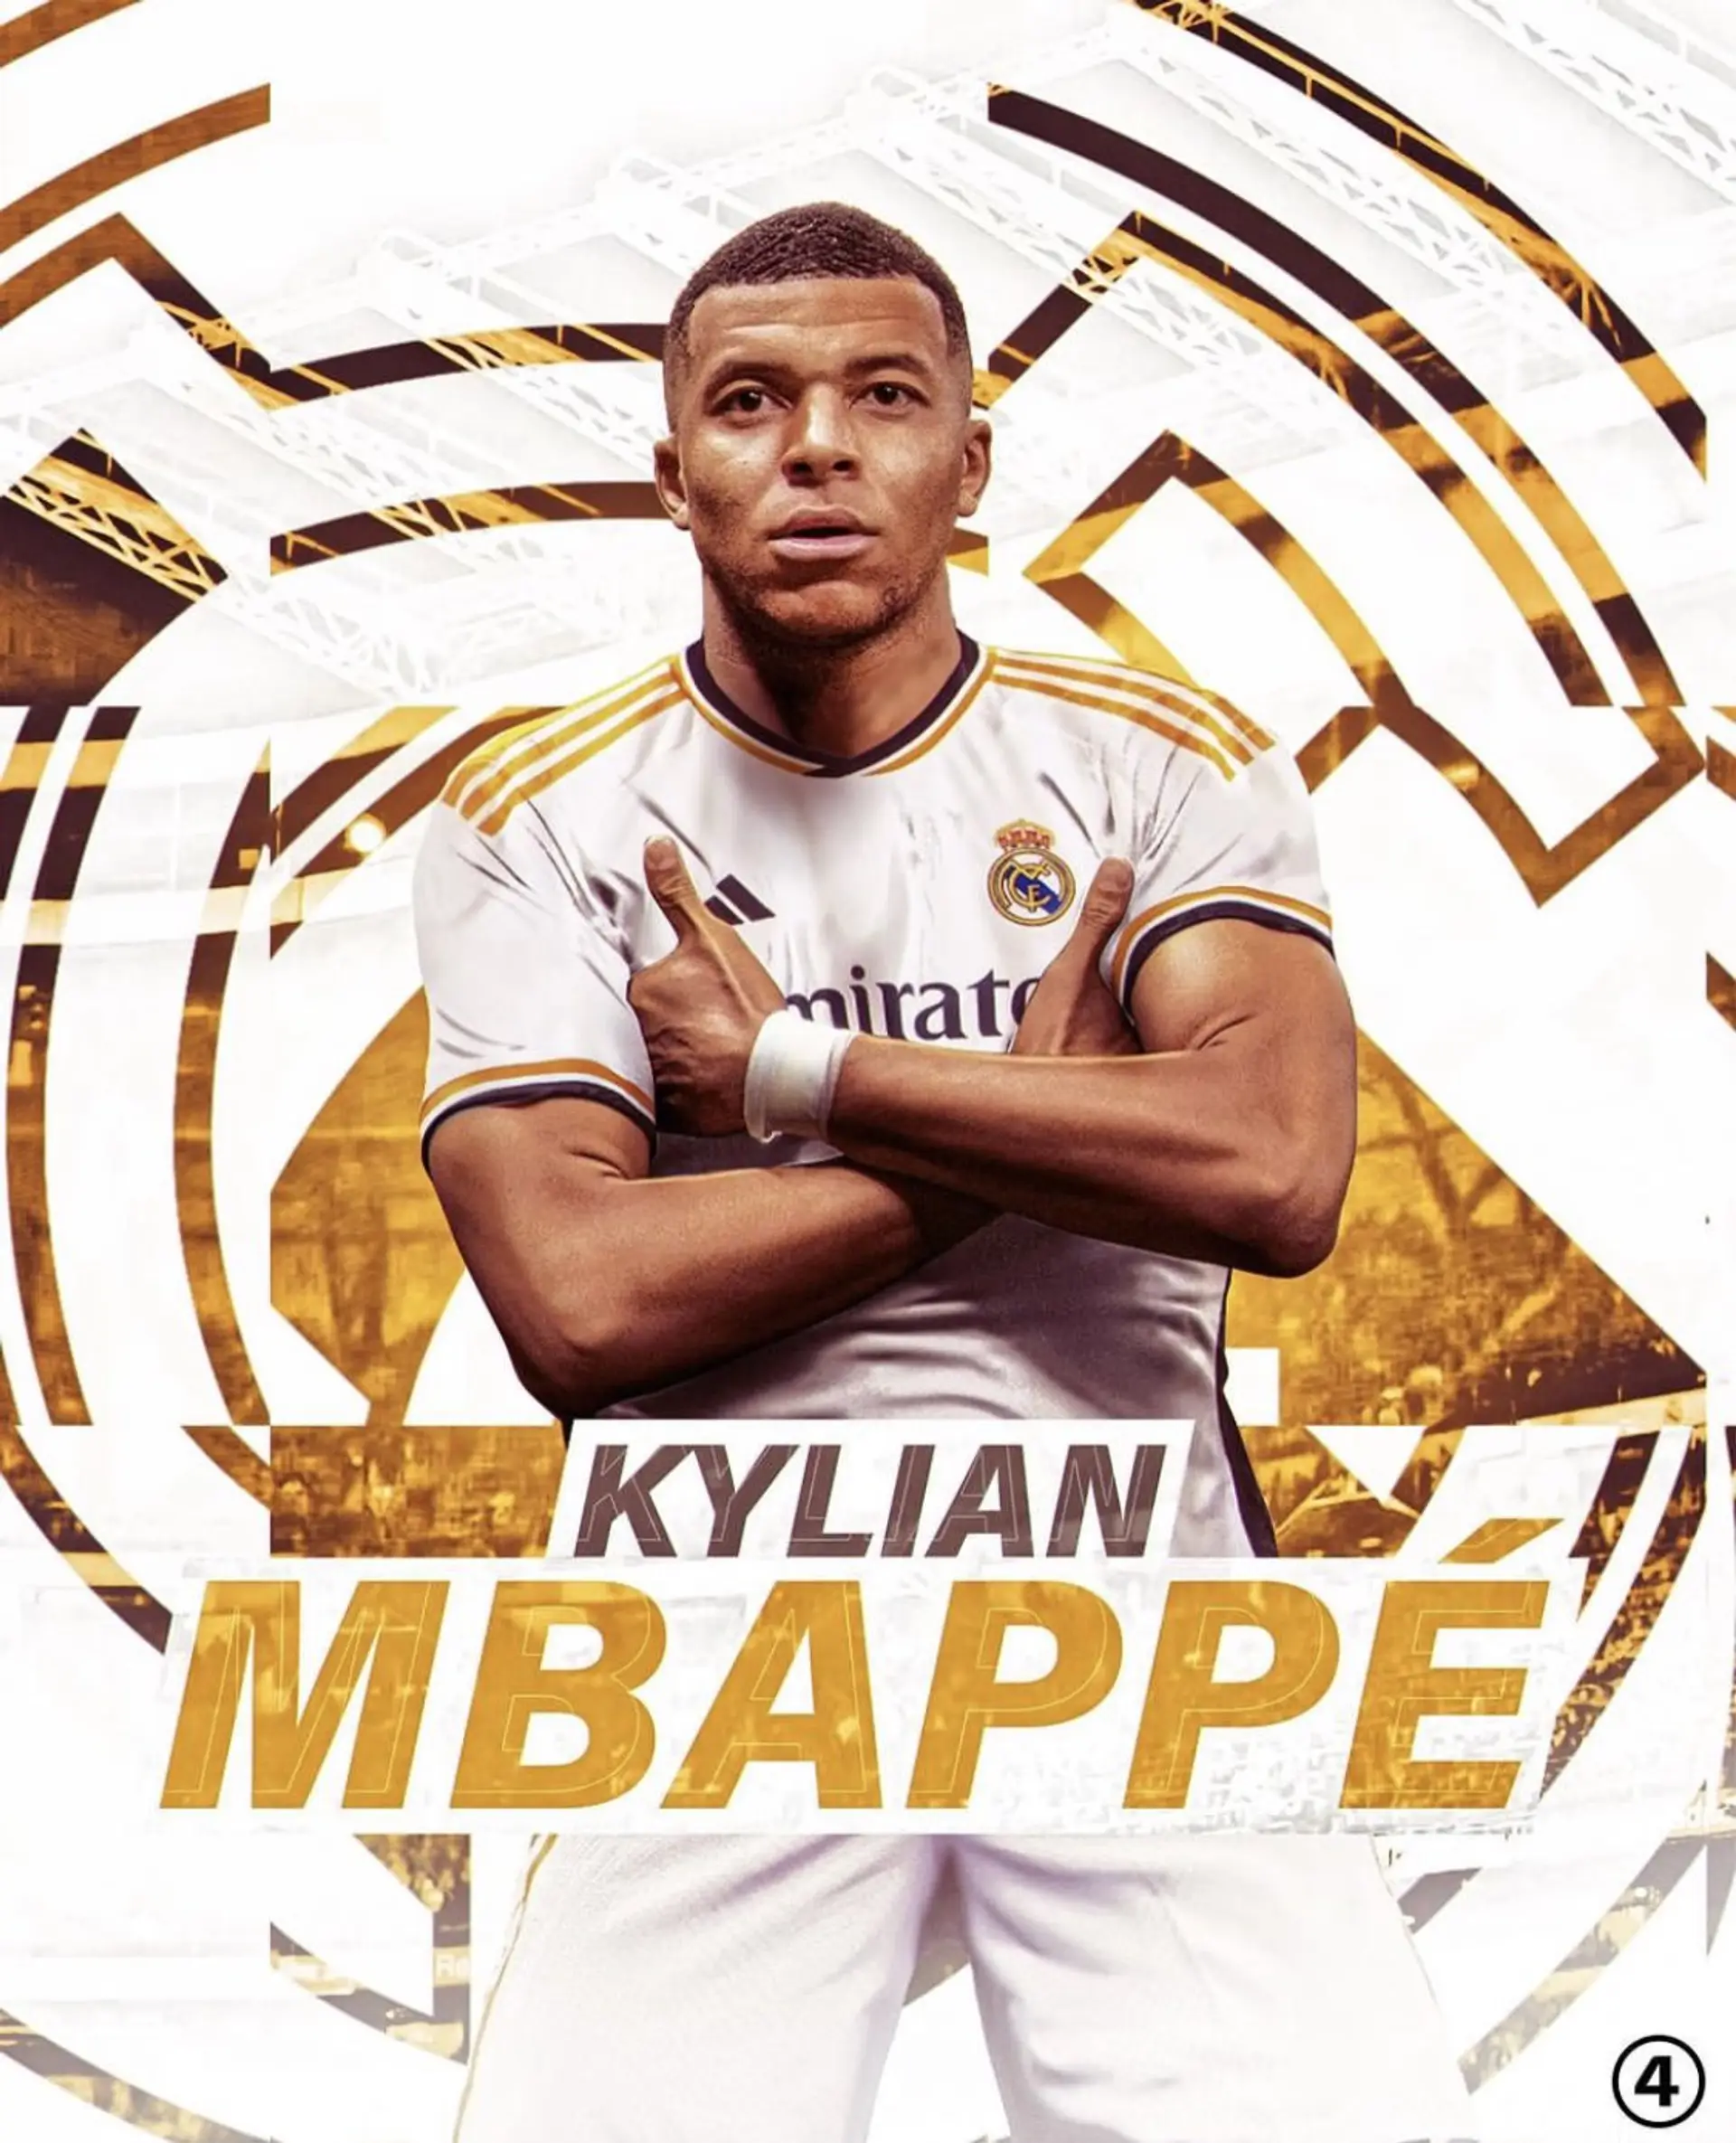 Real Madrid fixed salary proposal for Kylian Mbappé is way lower than